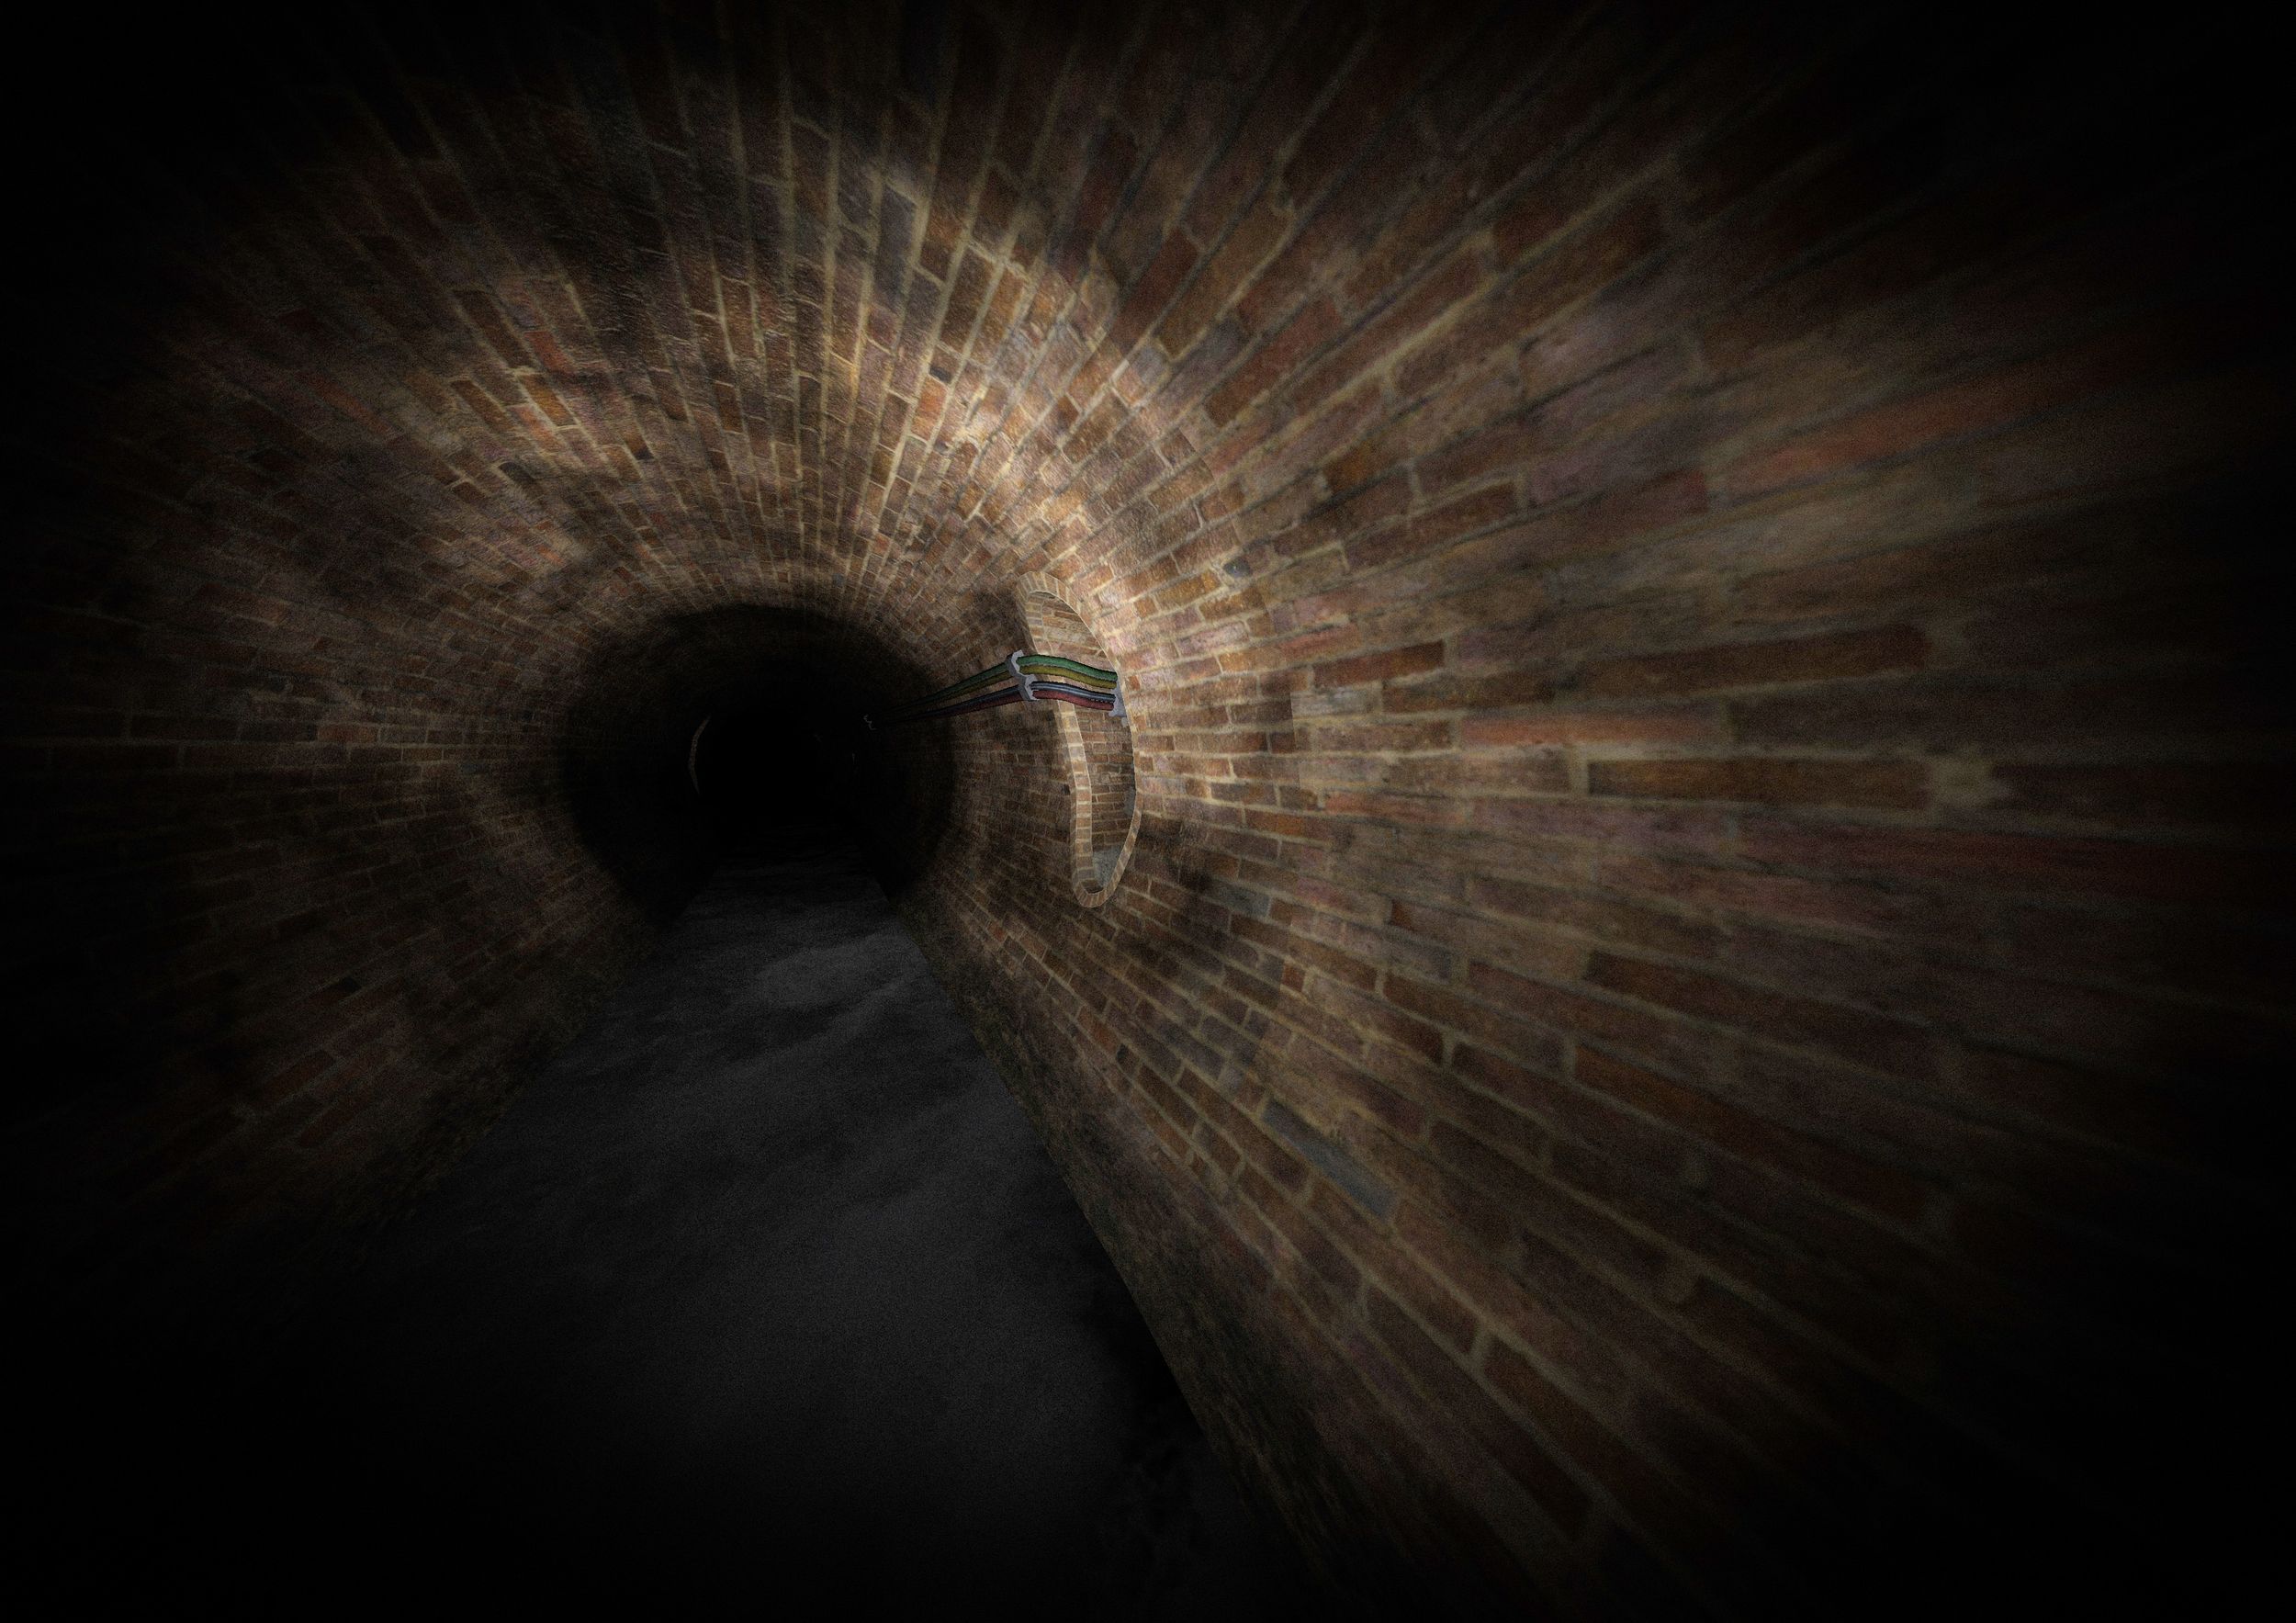 Underworld: a Virtual Experience of the London Sewers